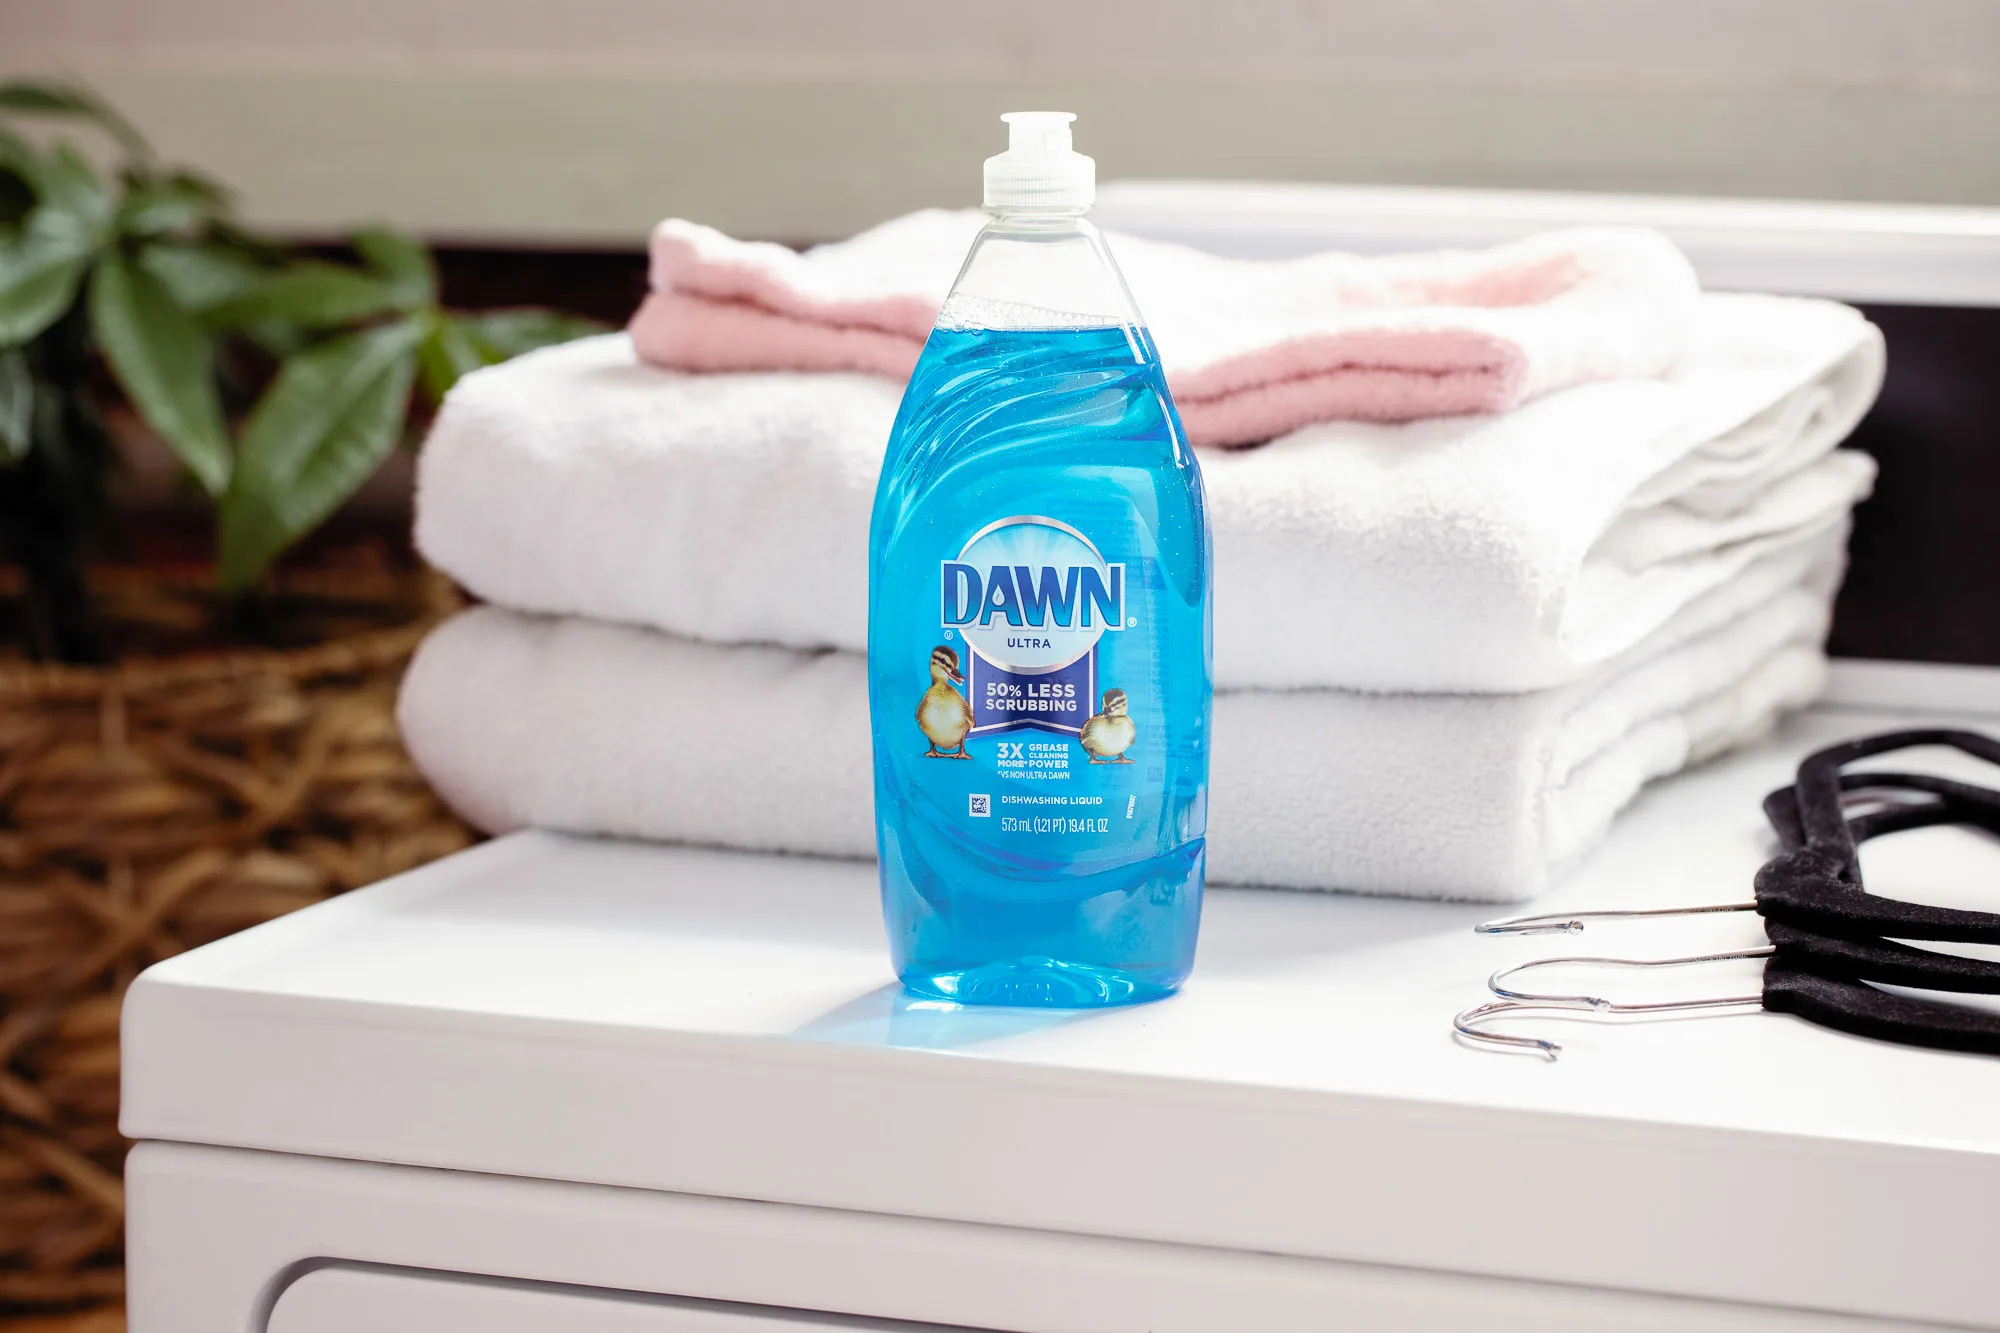 Liquid Dish Soap to remove stains